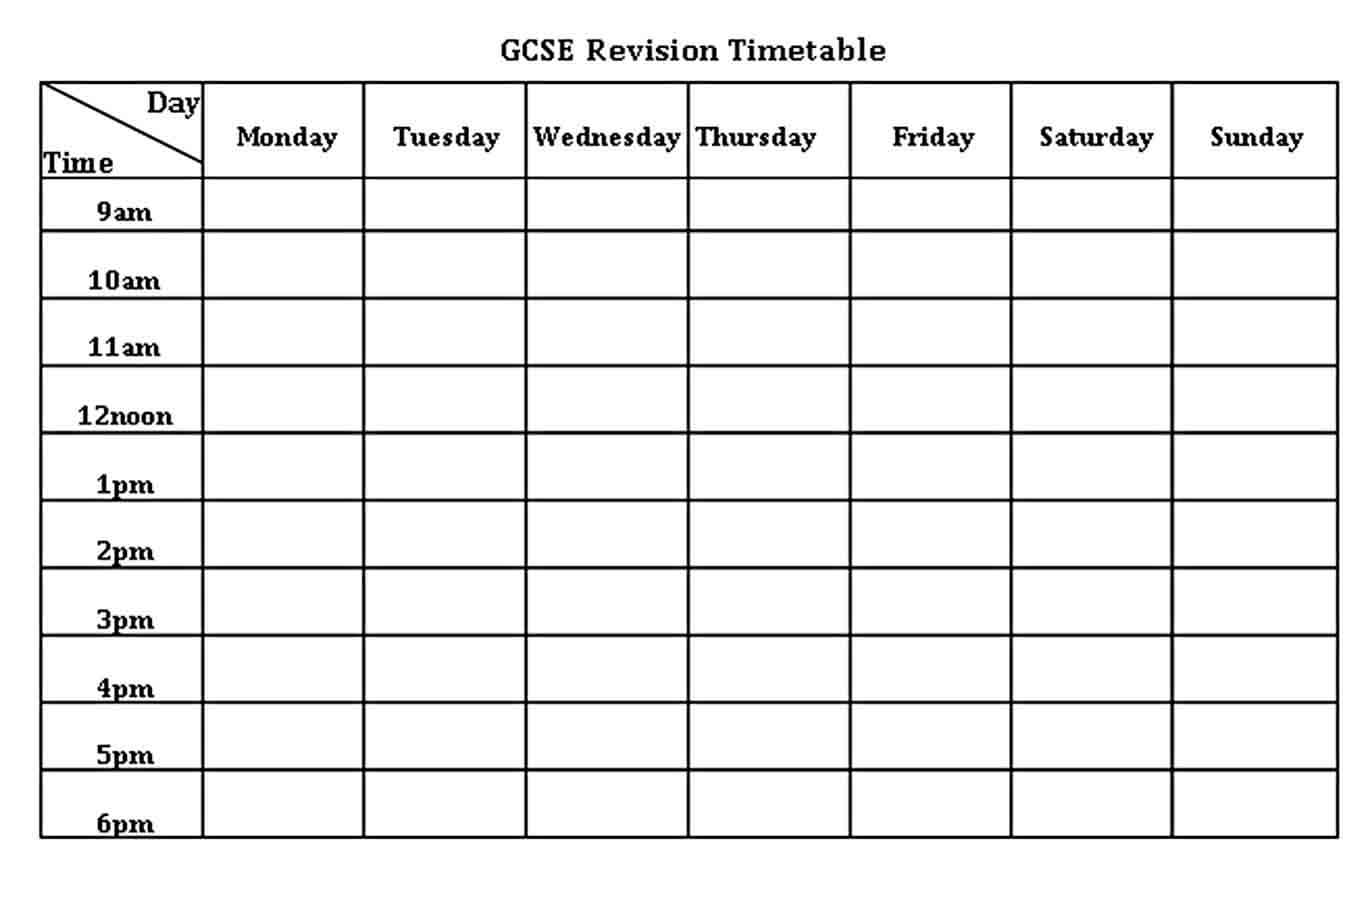 GCSE Revision Timetable Template